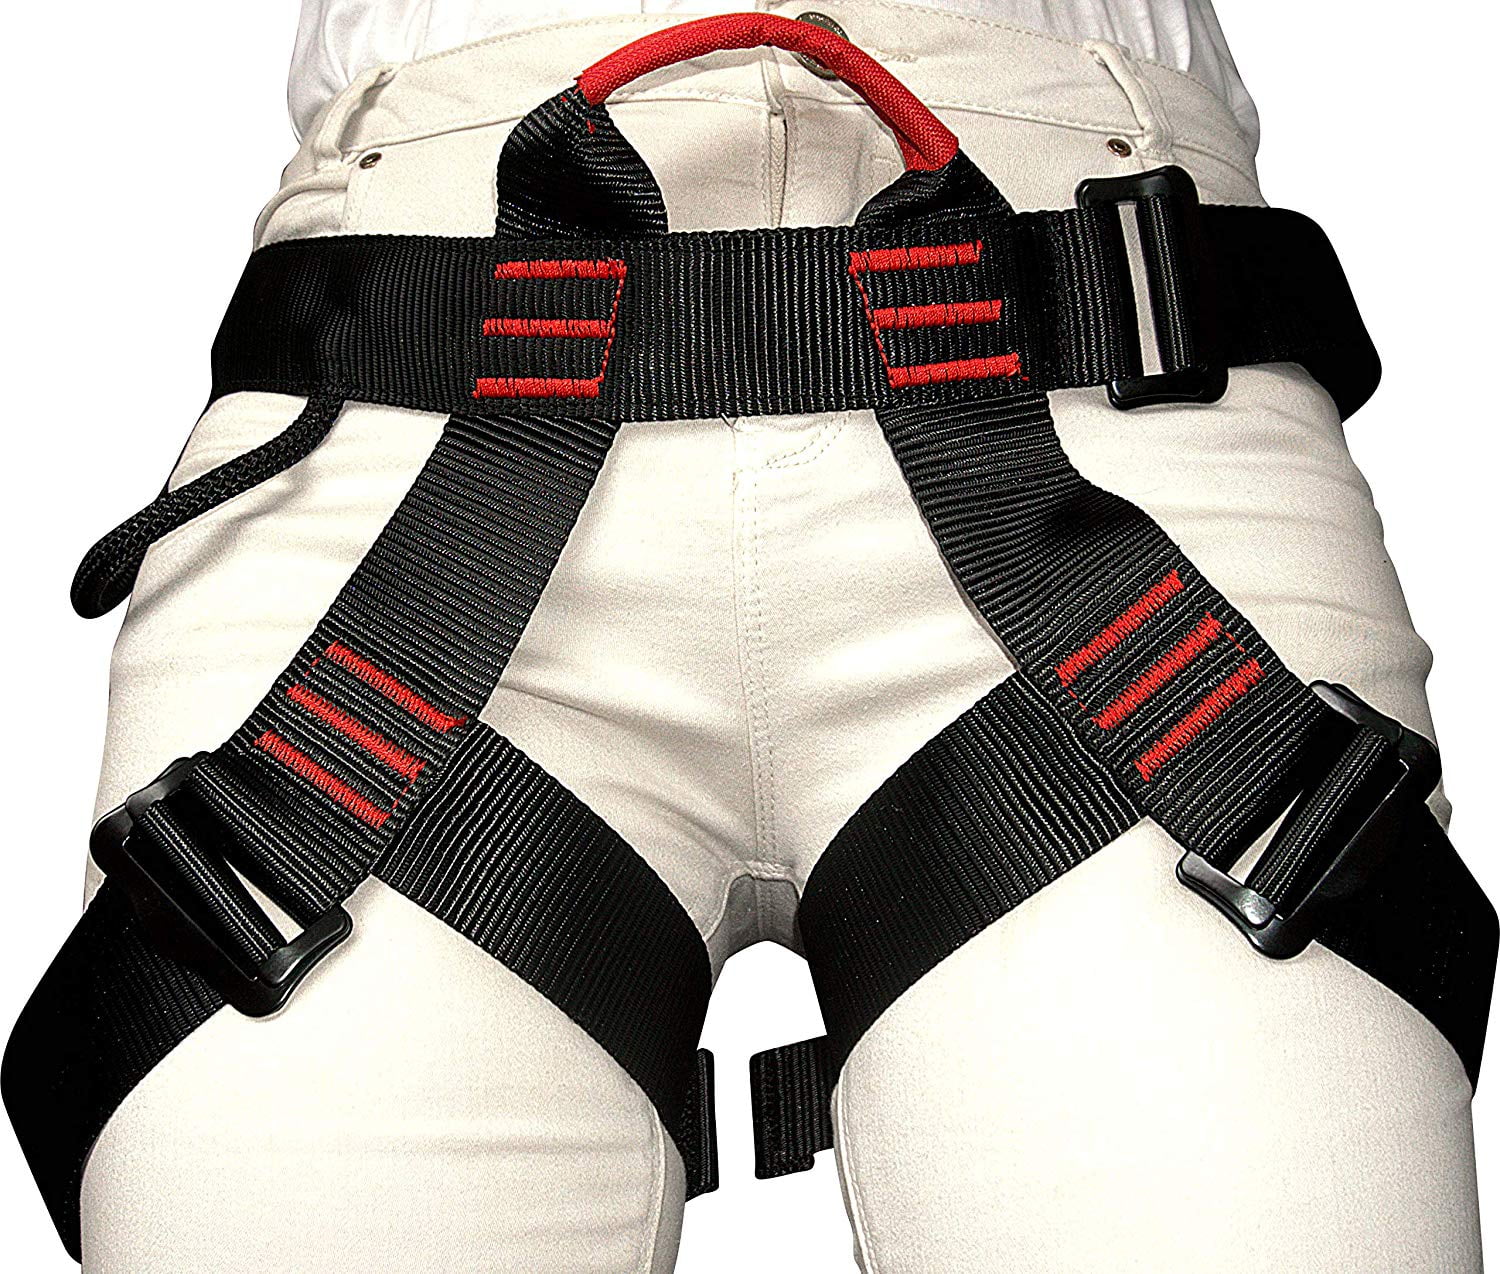 Treeup Climbing Belt Th 020 Tree Care Safety Belt Forestry Accessories Harness 